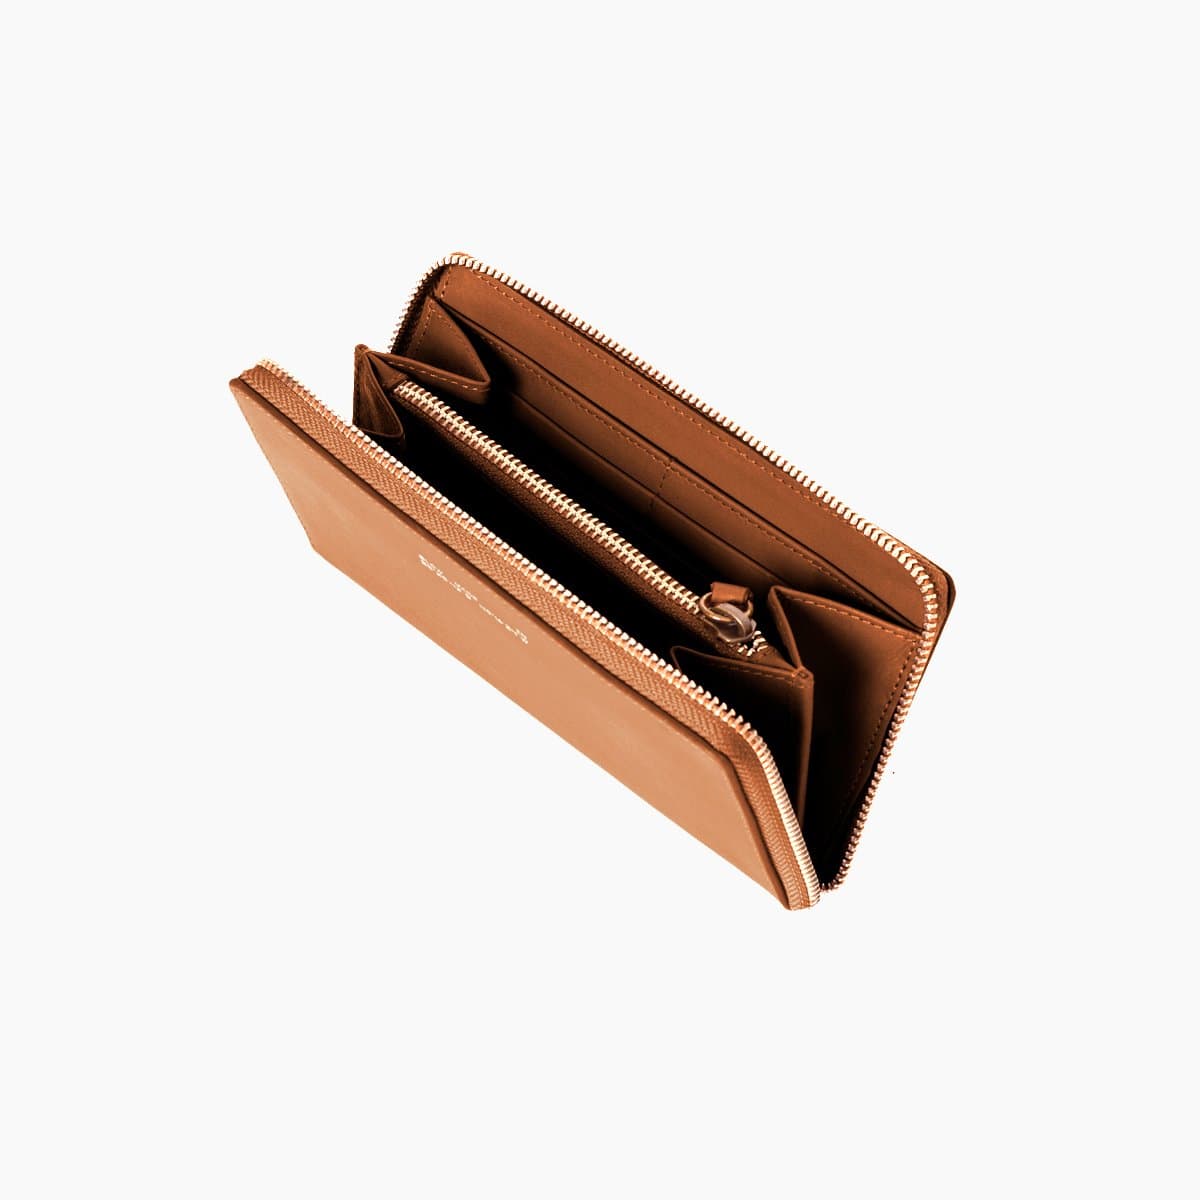 Beatnik & Sons Leather accessories the Joan wallet